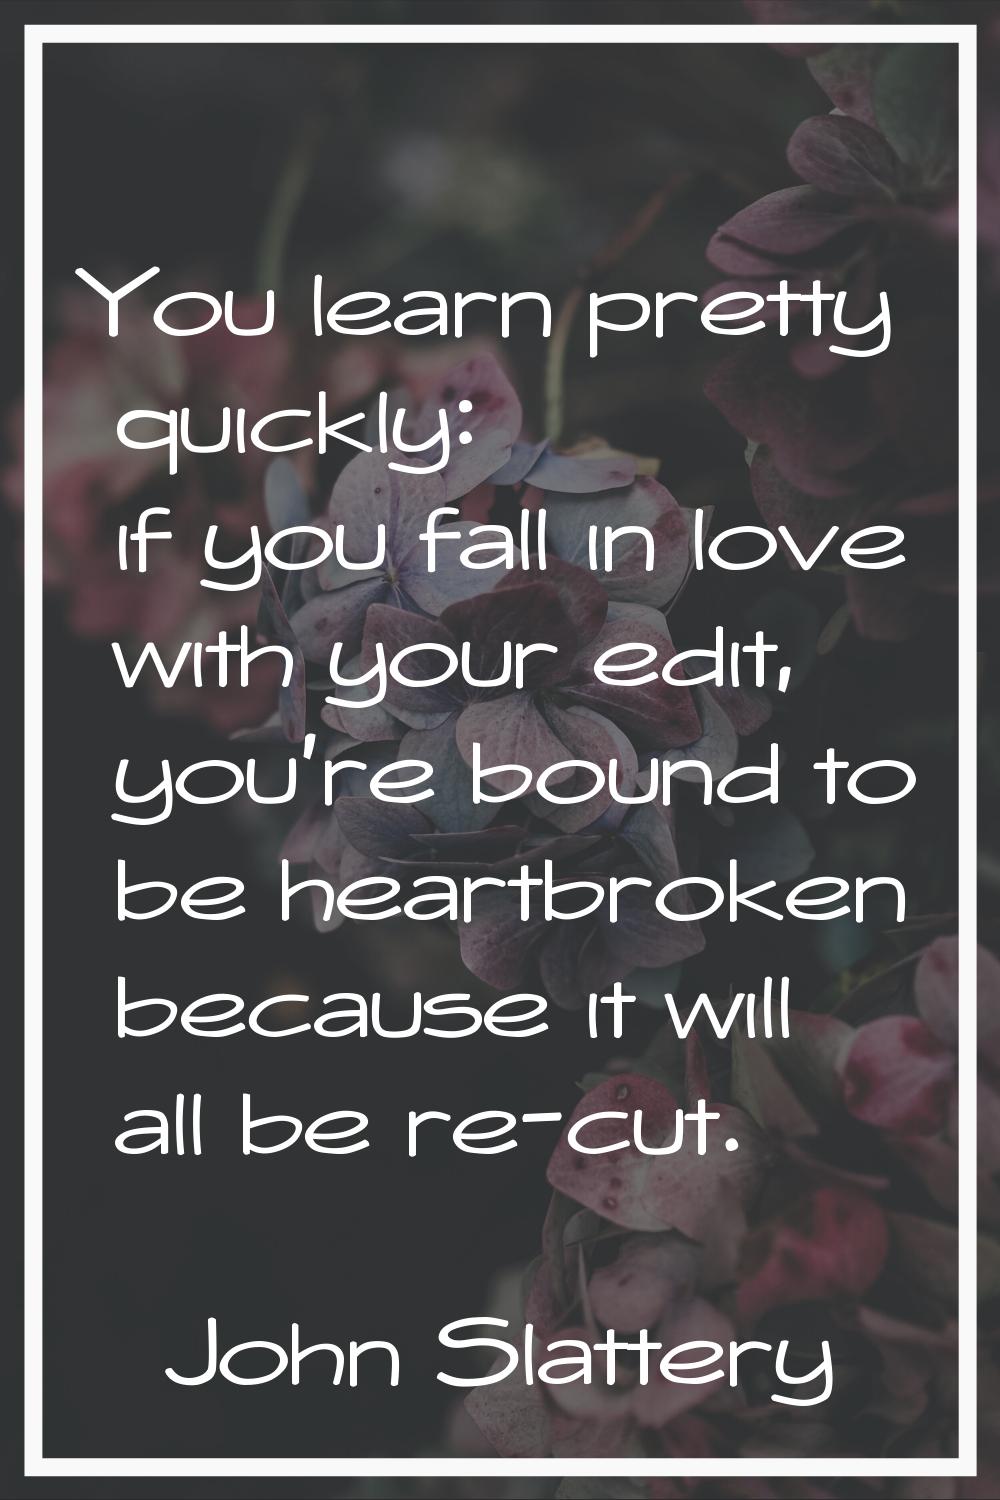 You learn pretty quickly: if you fall in love with your edit, you're bound to be heartbroken becaus